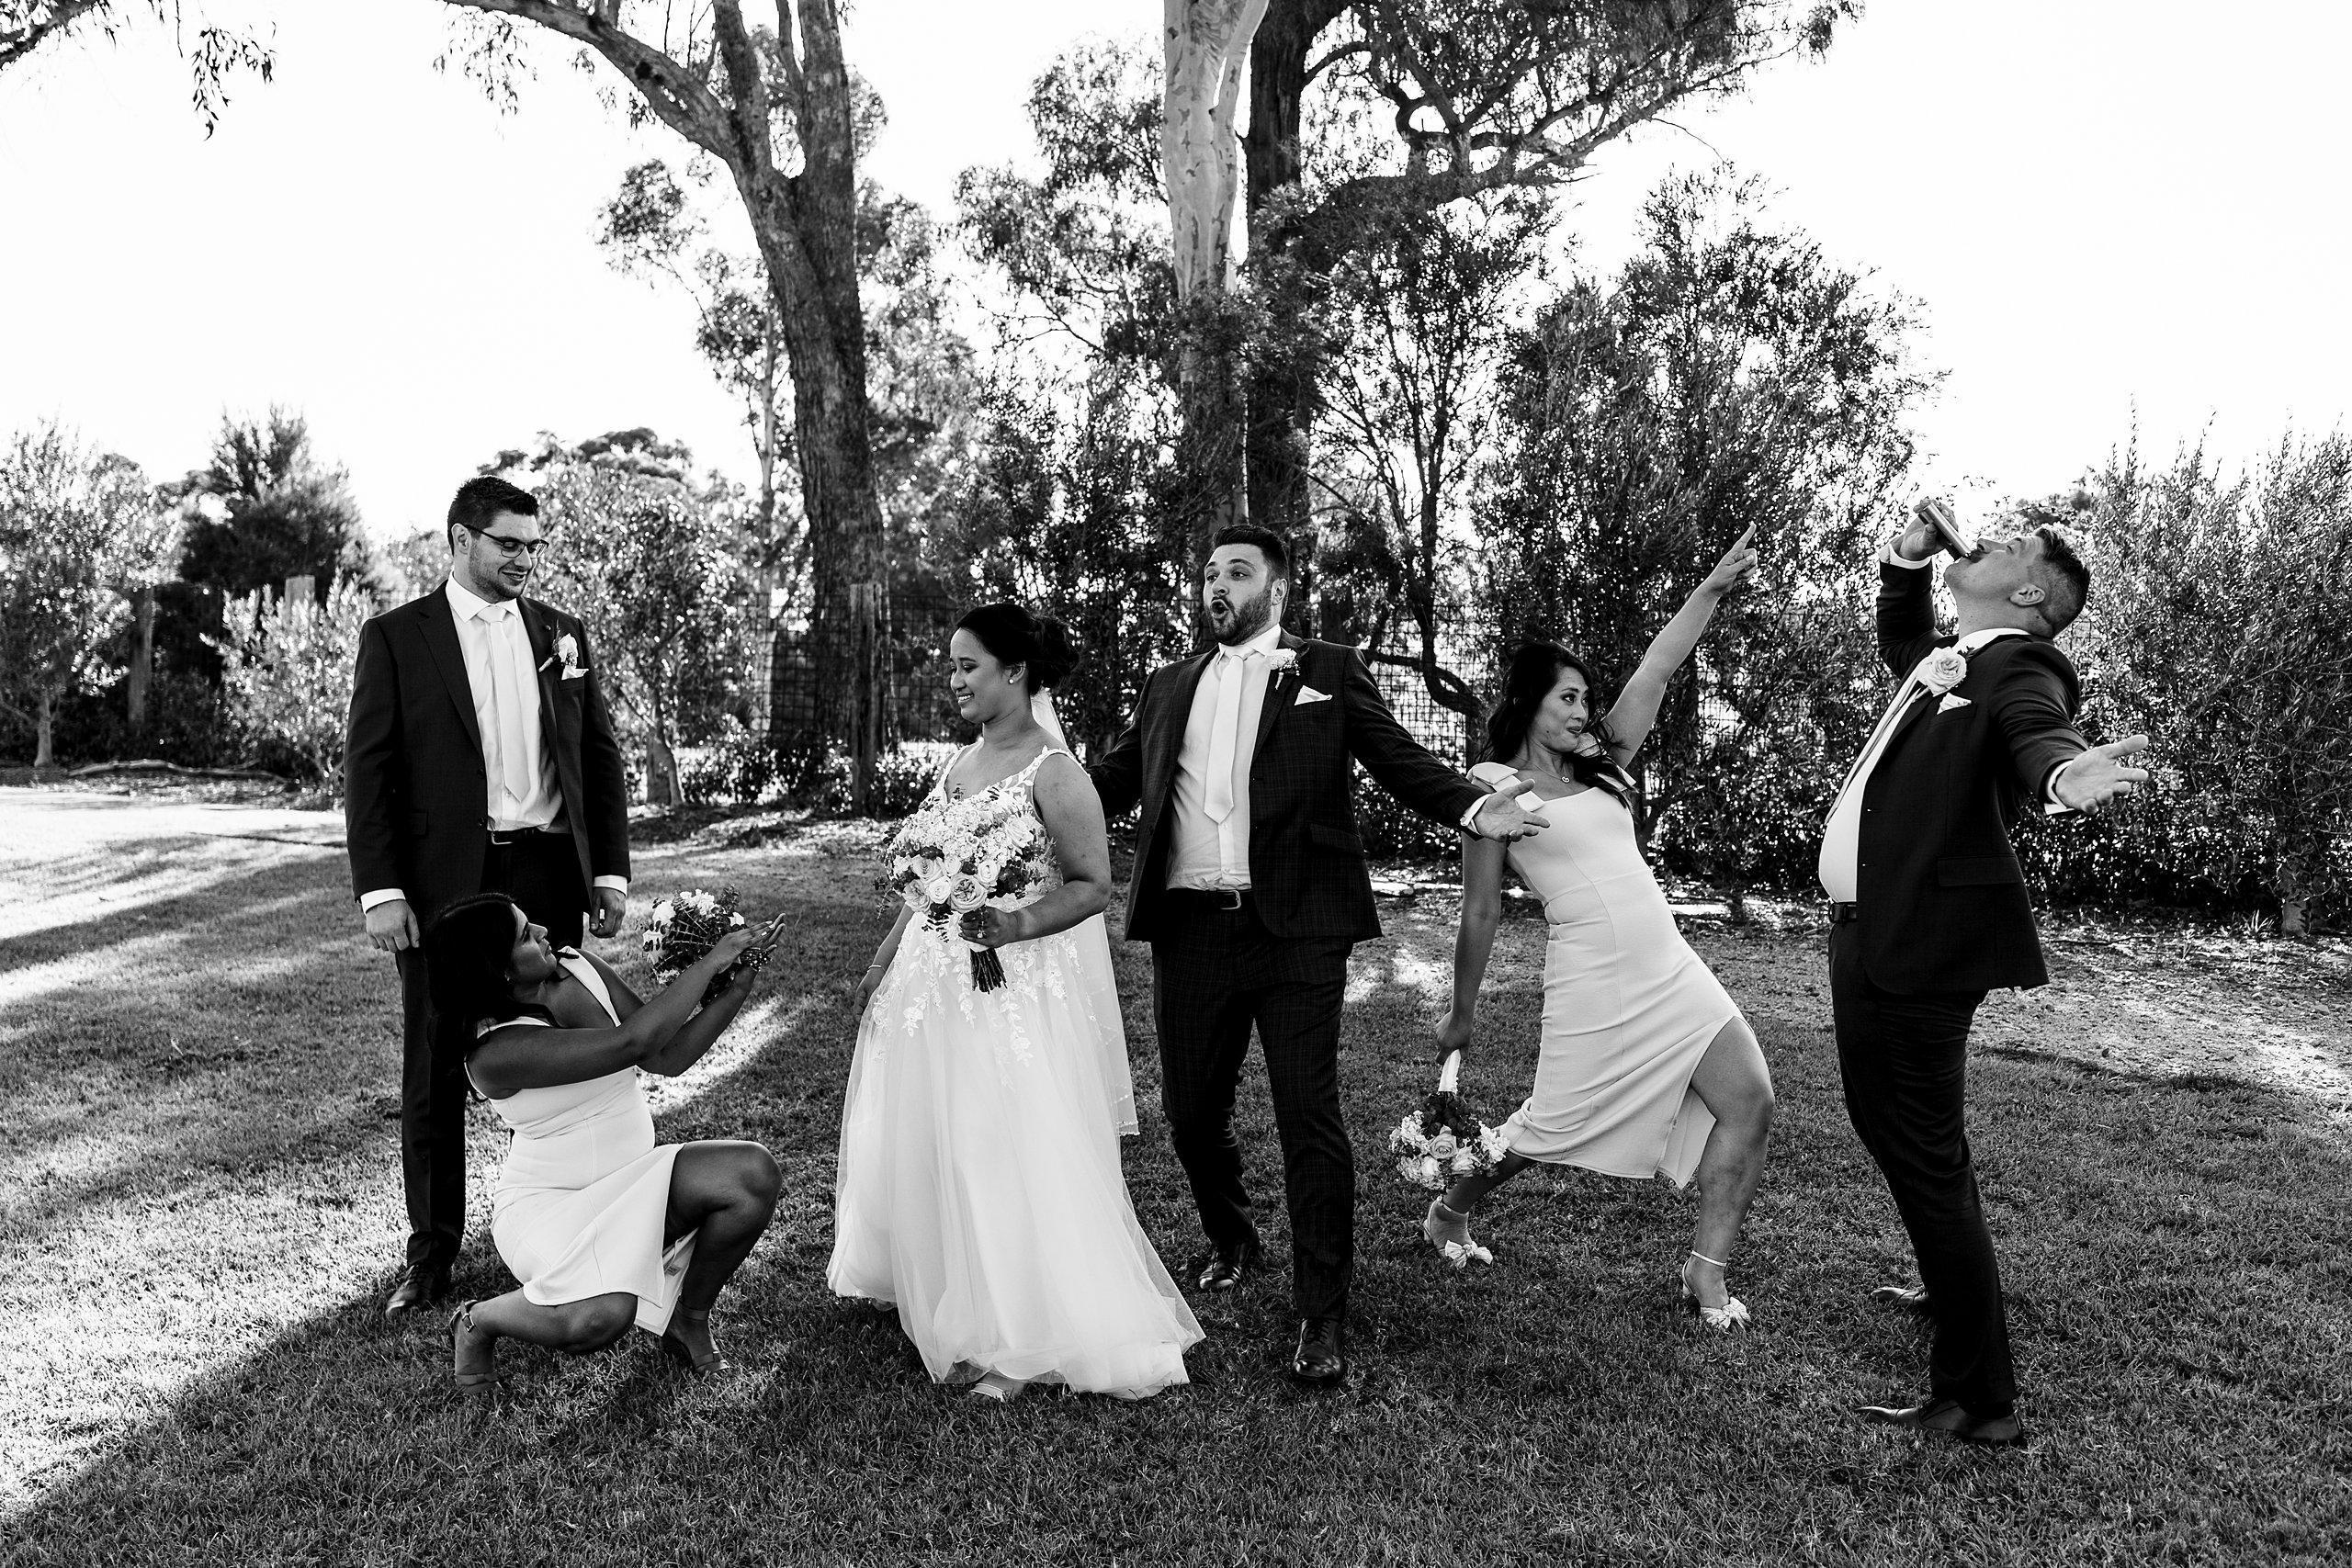 what your favourite dance move wedding party games